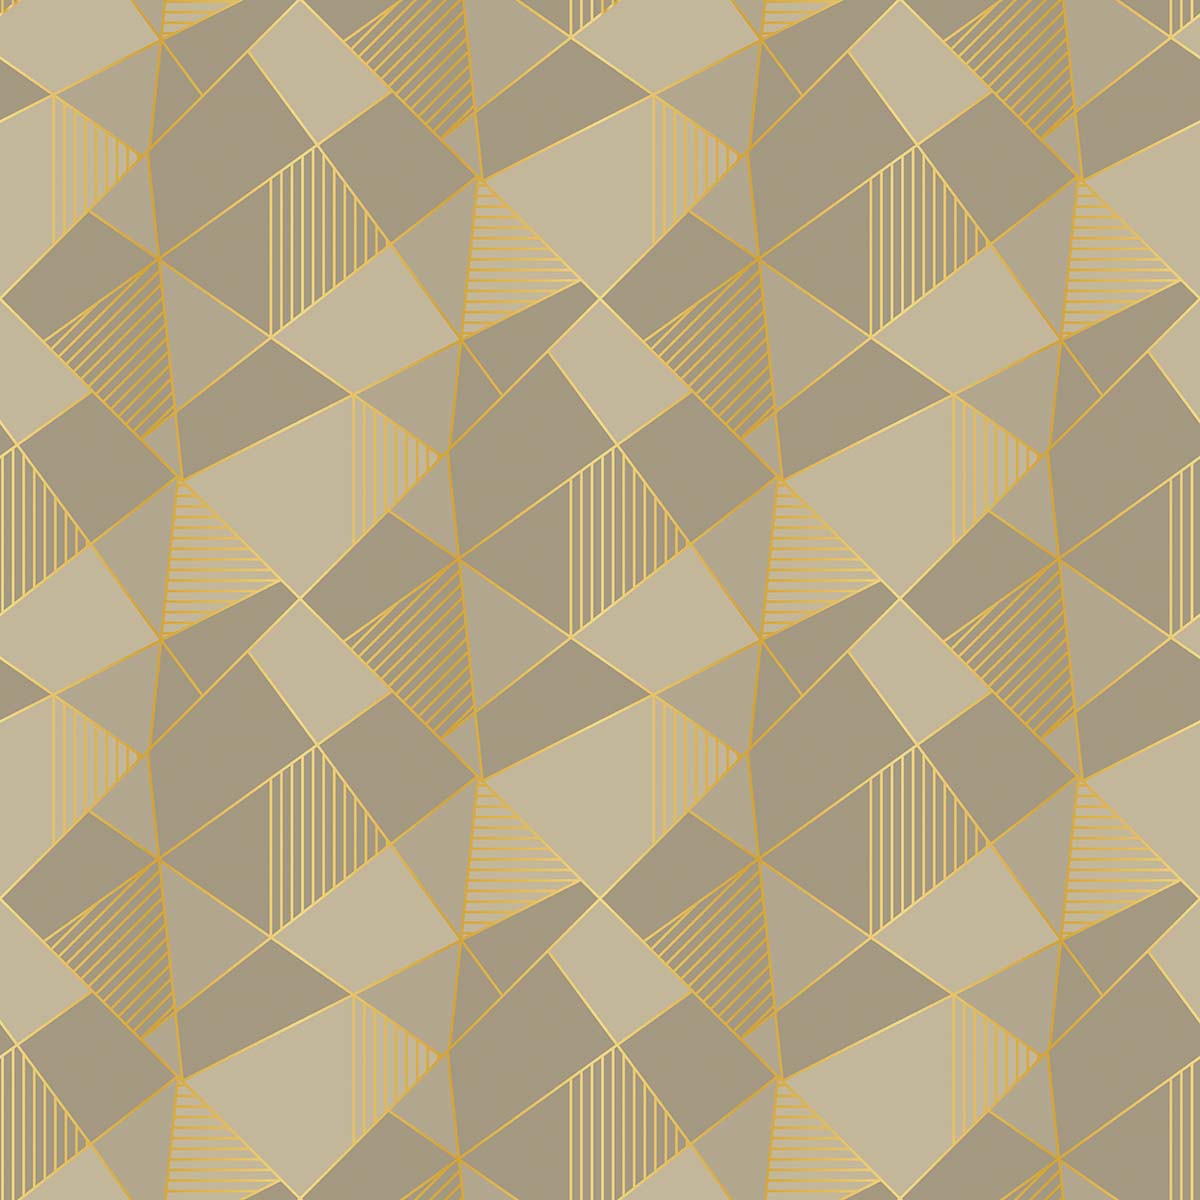 A pattern of triangles and lines